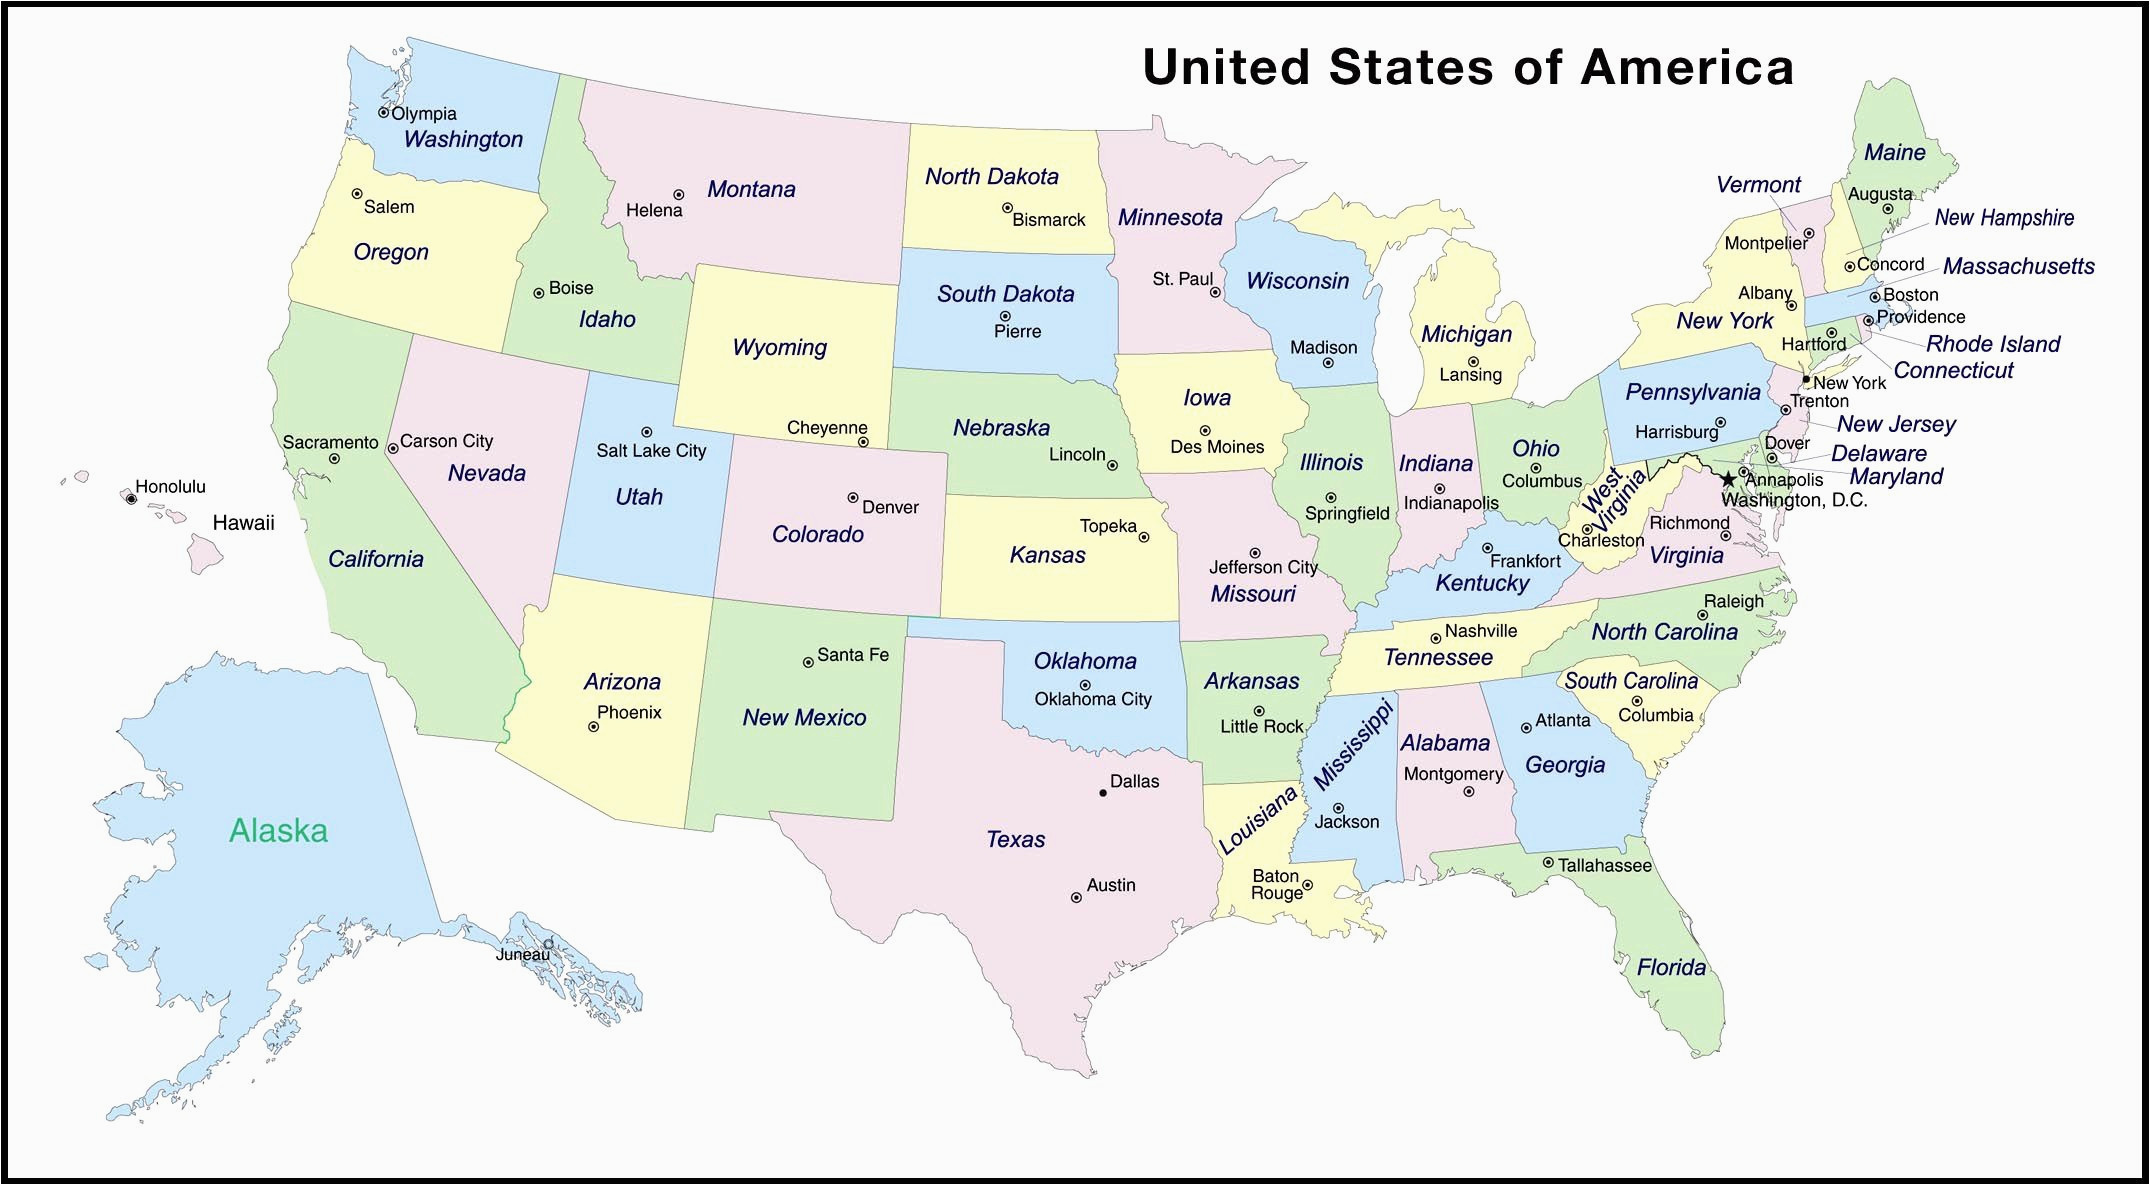 Area Codes In California Map United States area Codes Map New Map Od Us with Cities Wmasteros